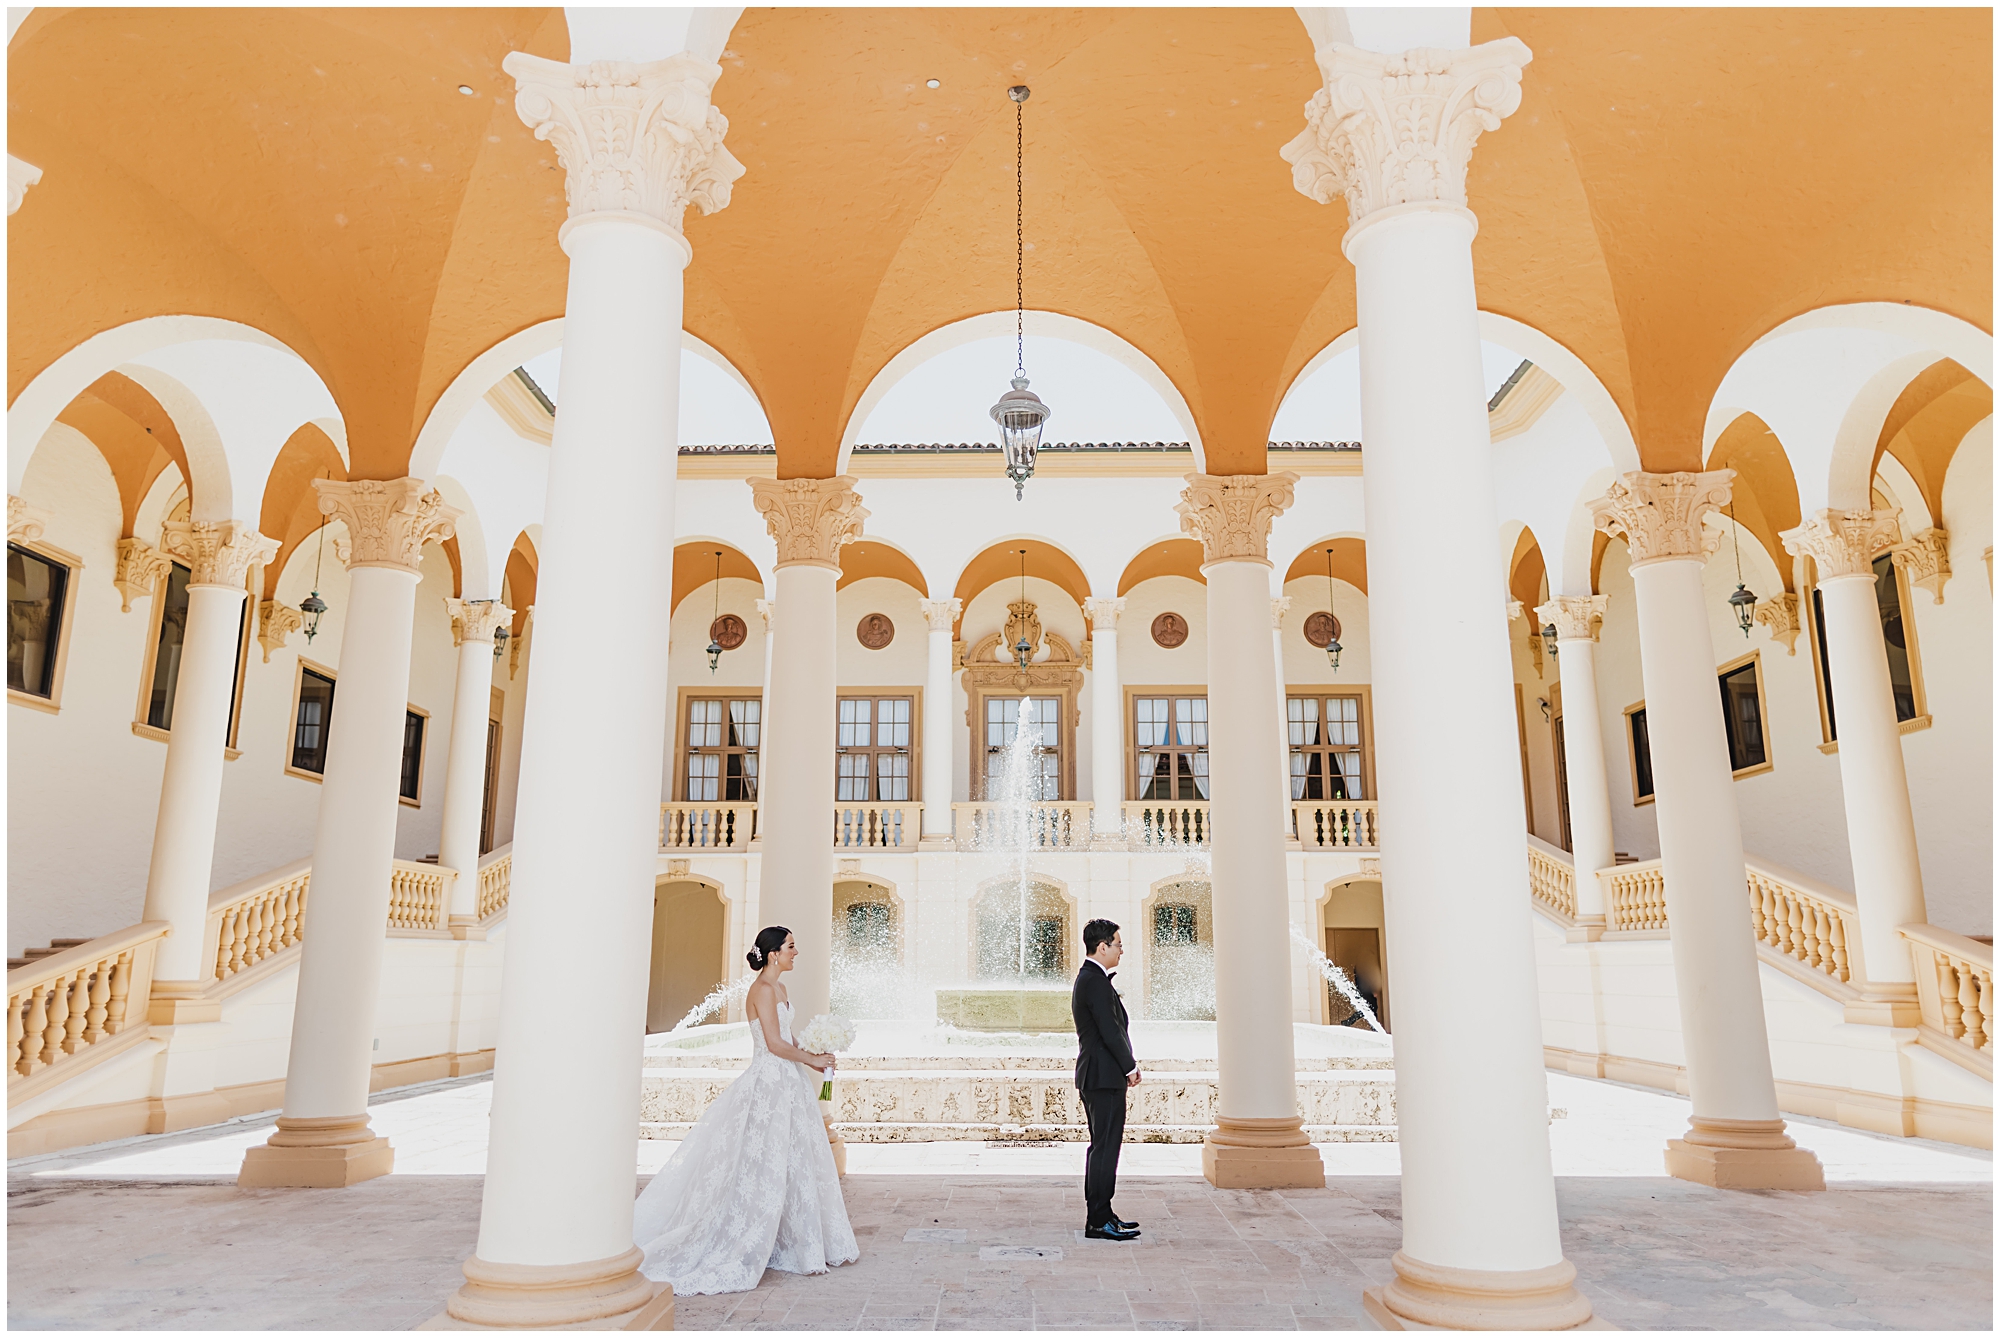 First look of the bride at the Biltmore Hotel in Coral gables.